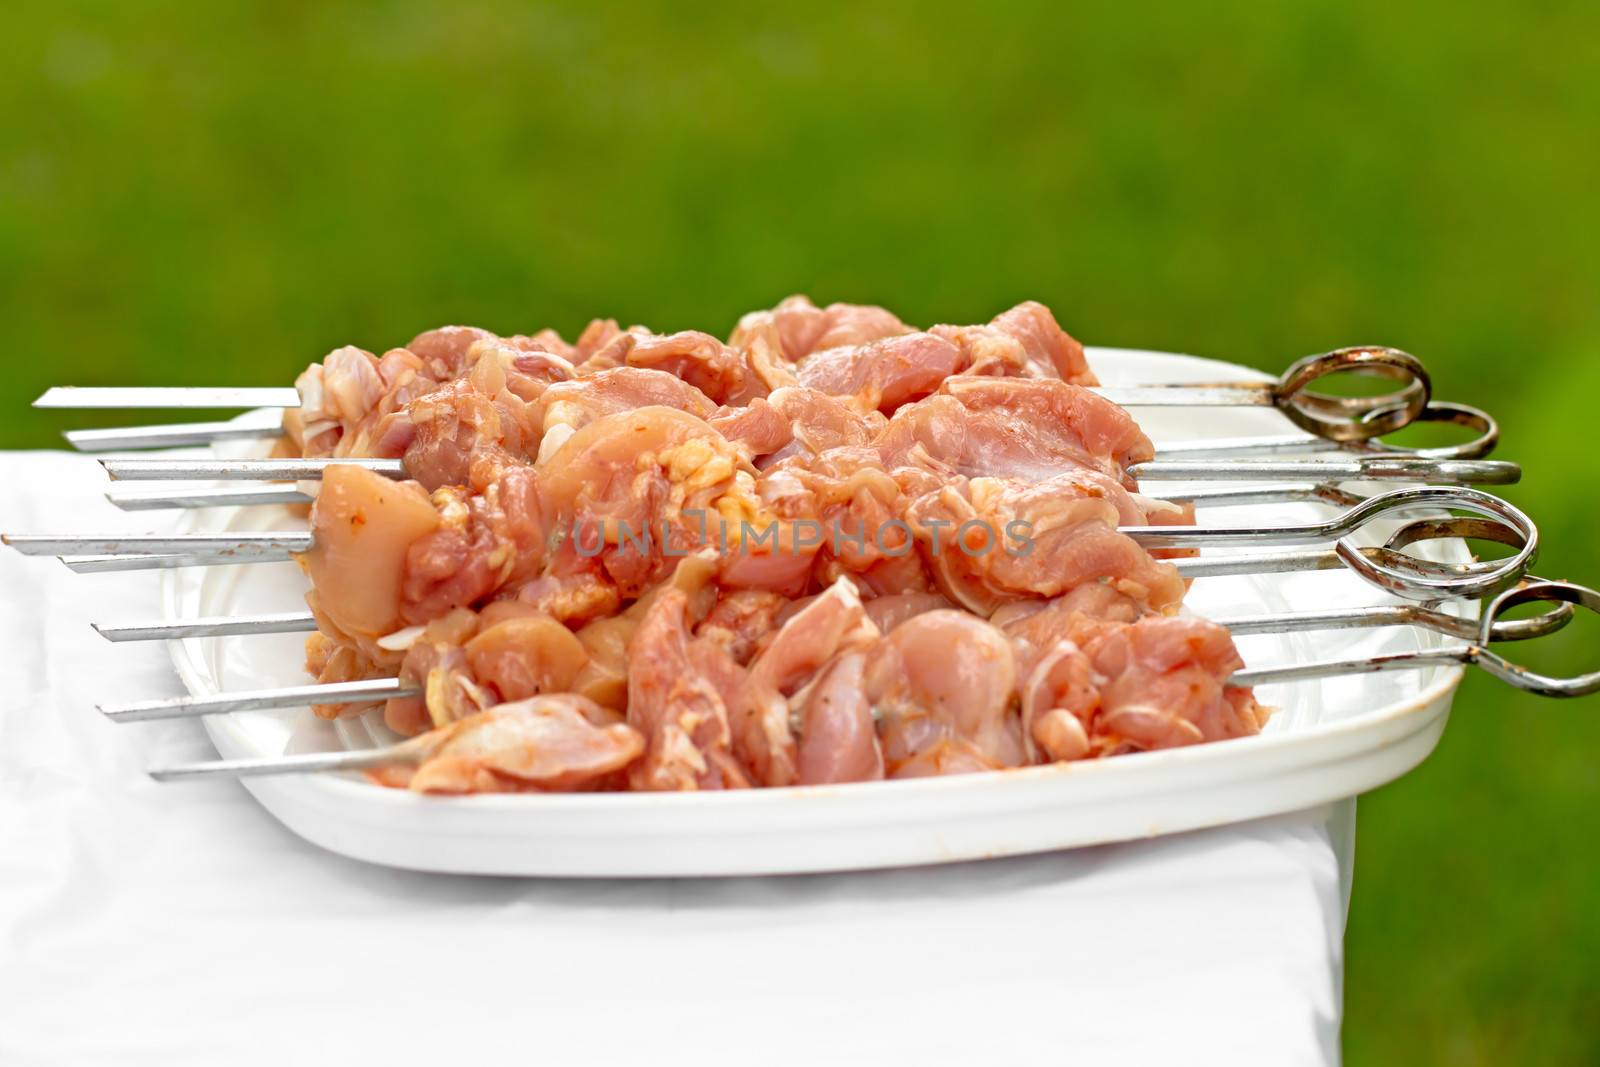 Raw chicken skewers ready for BBQ by epridnia